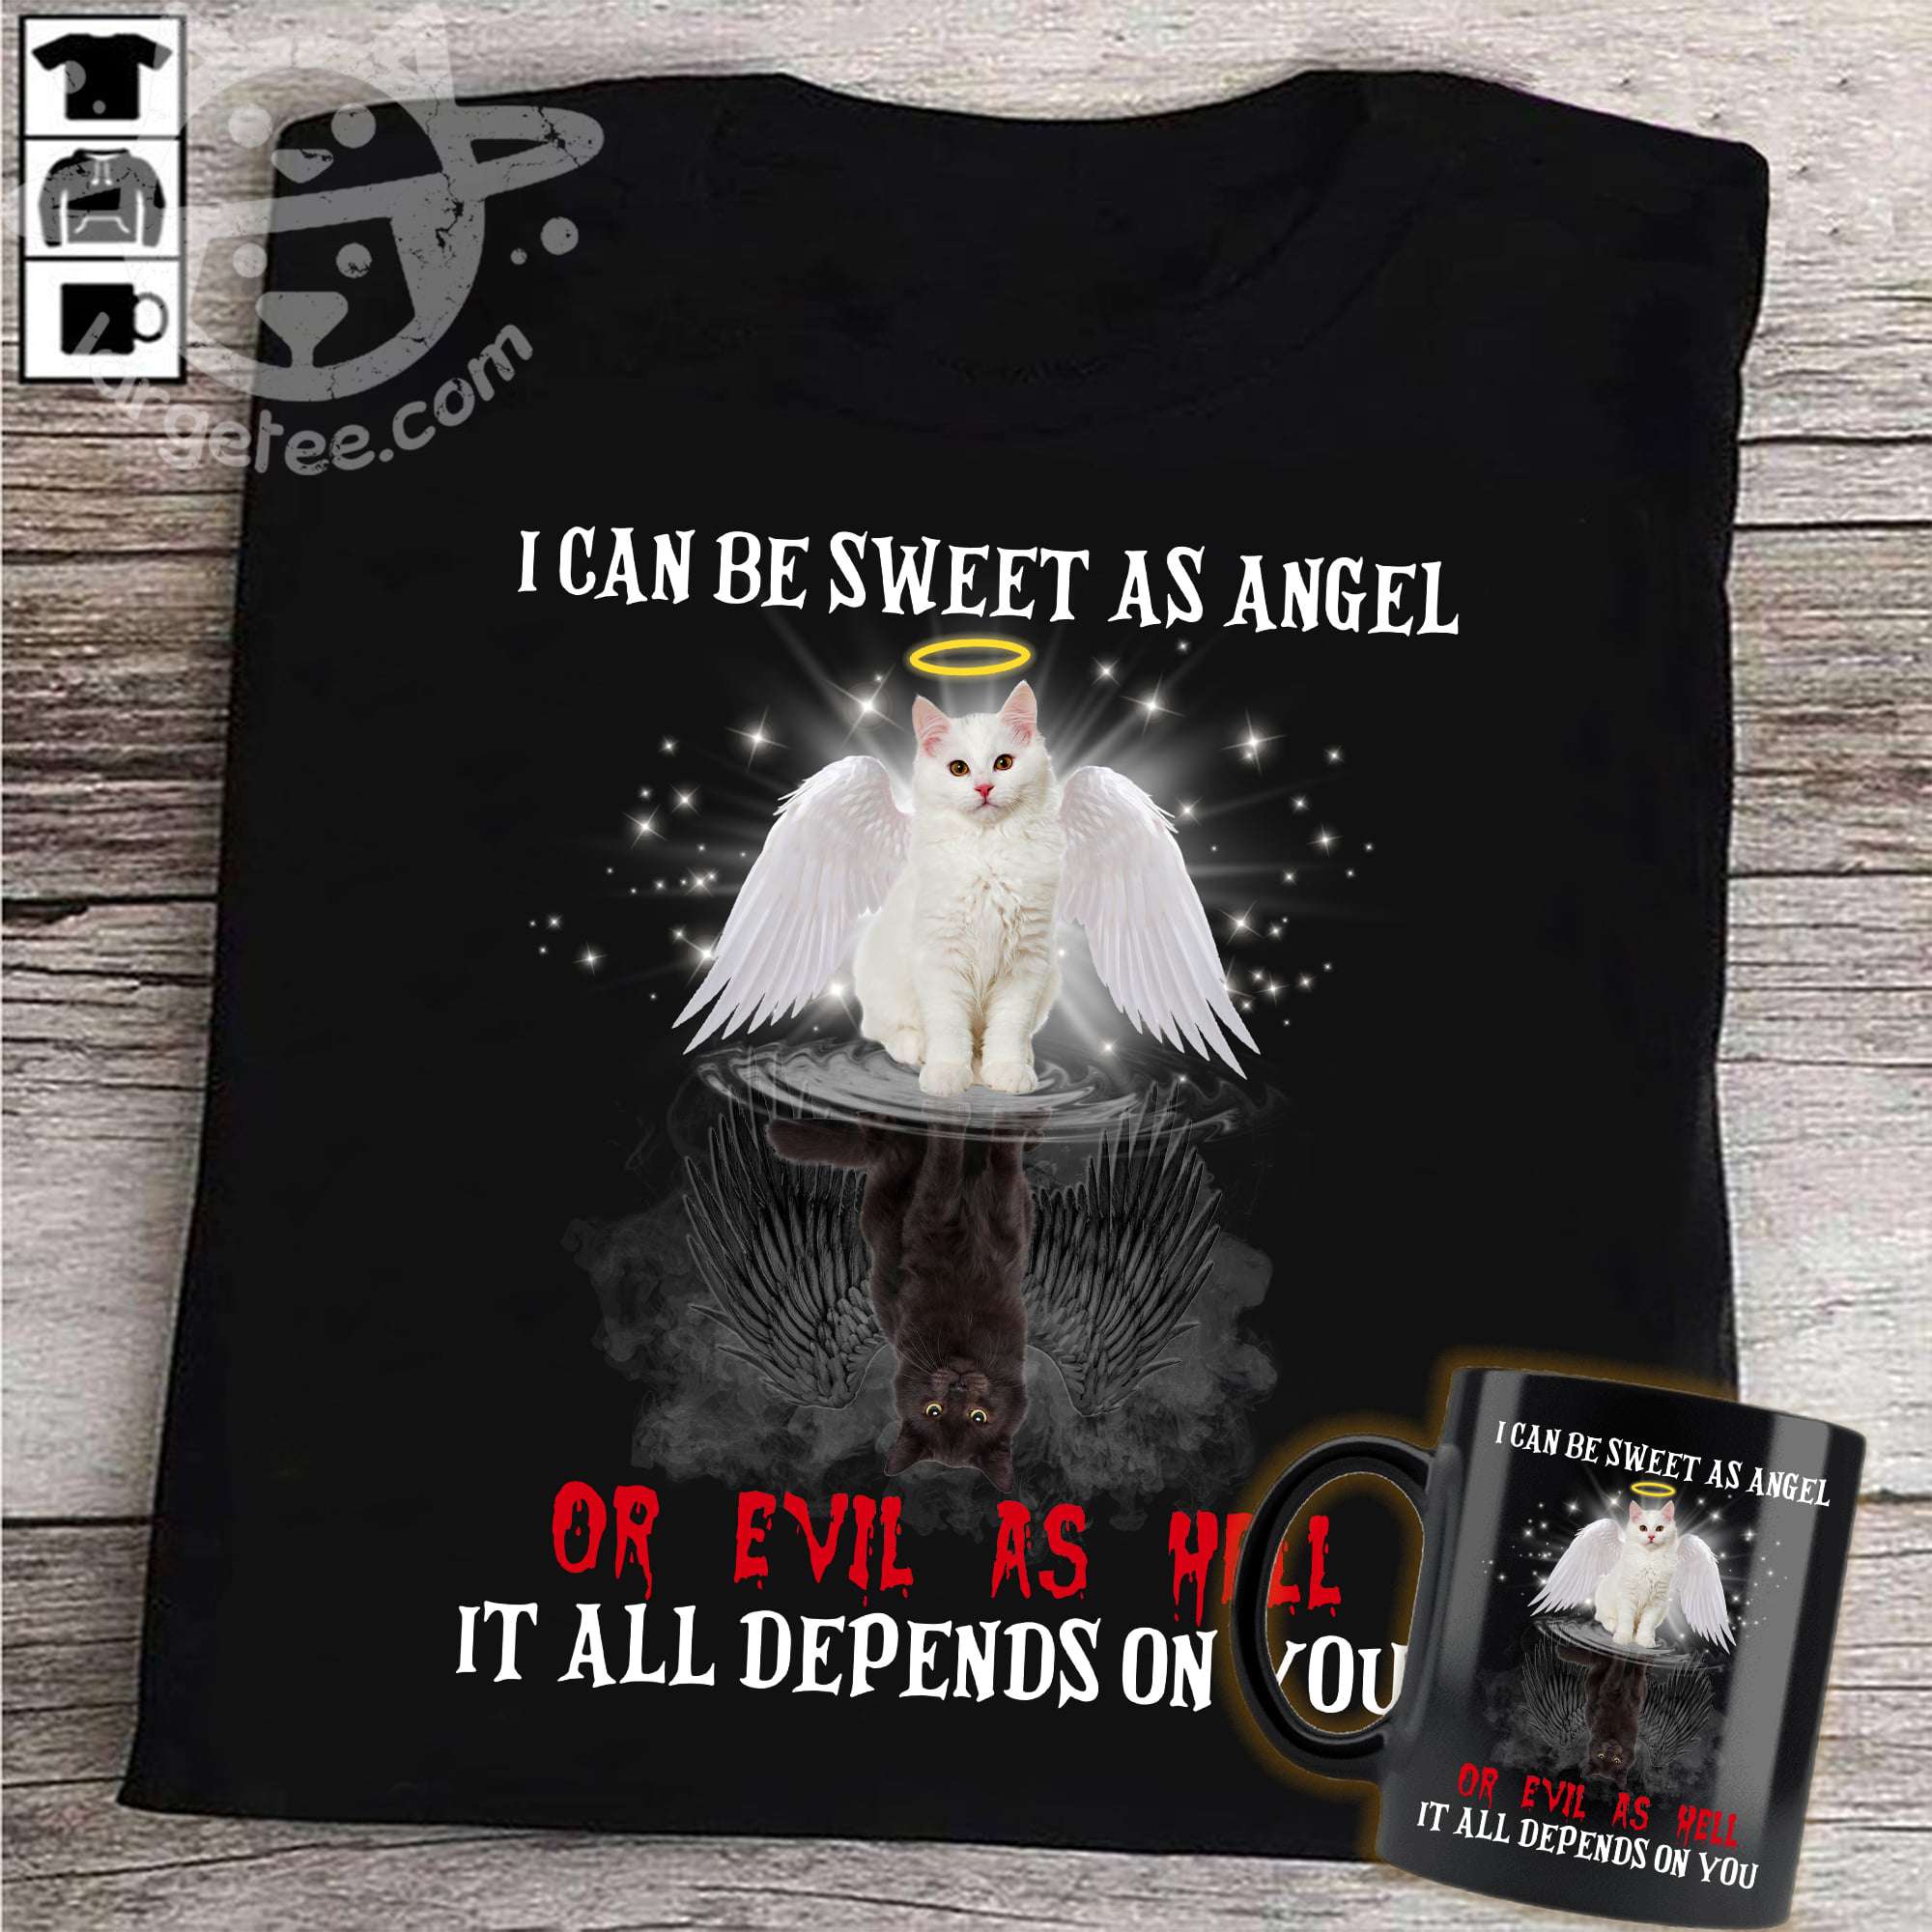 Angel Cat, Evil Cat - I can be sweet as angel or evil as hell it all depends on you